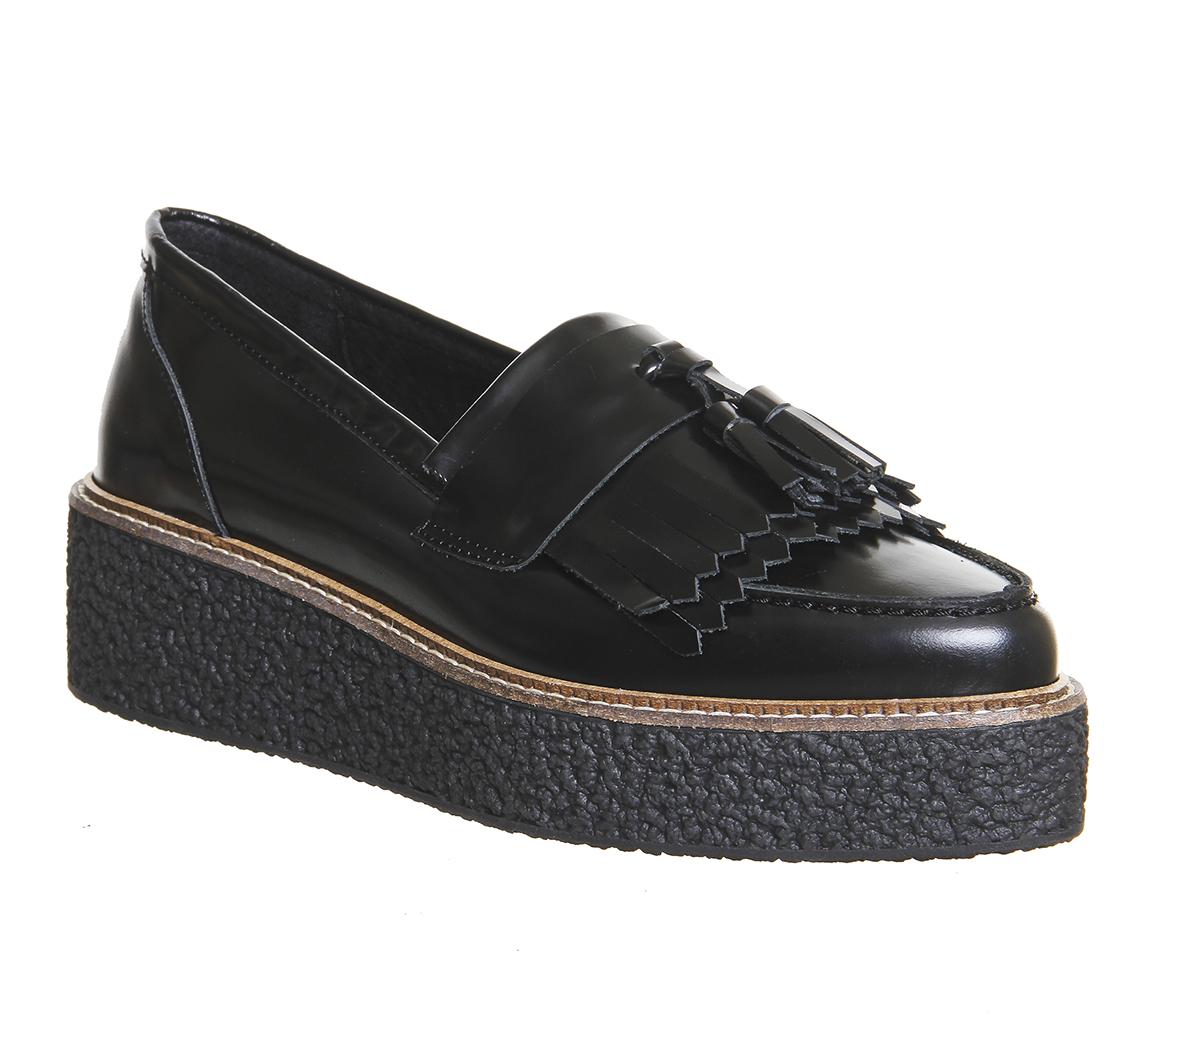 creeper sole loafers